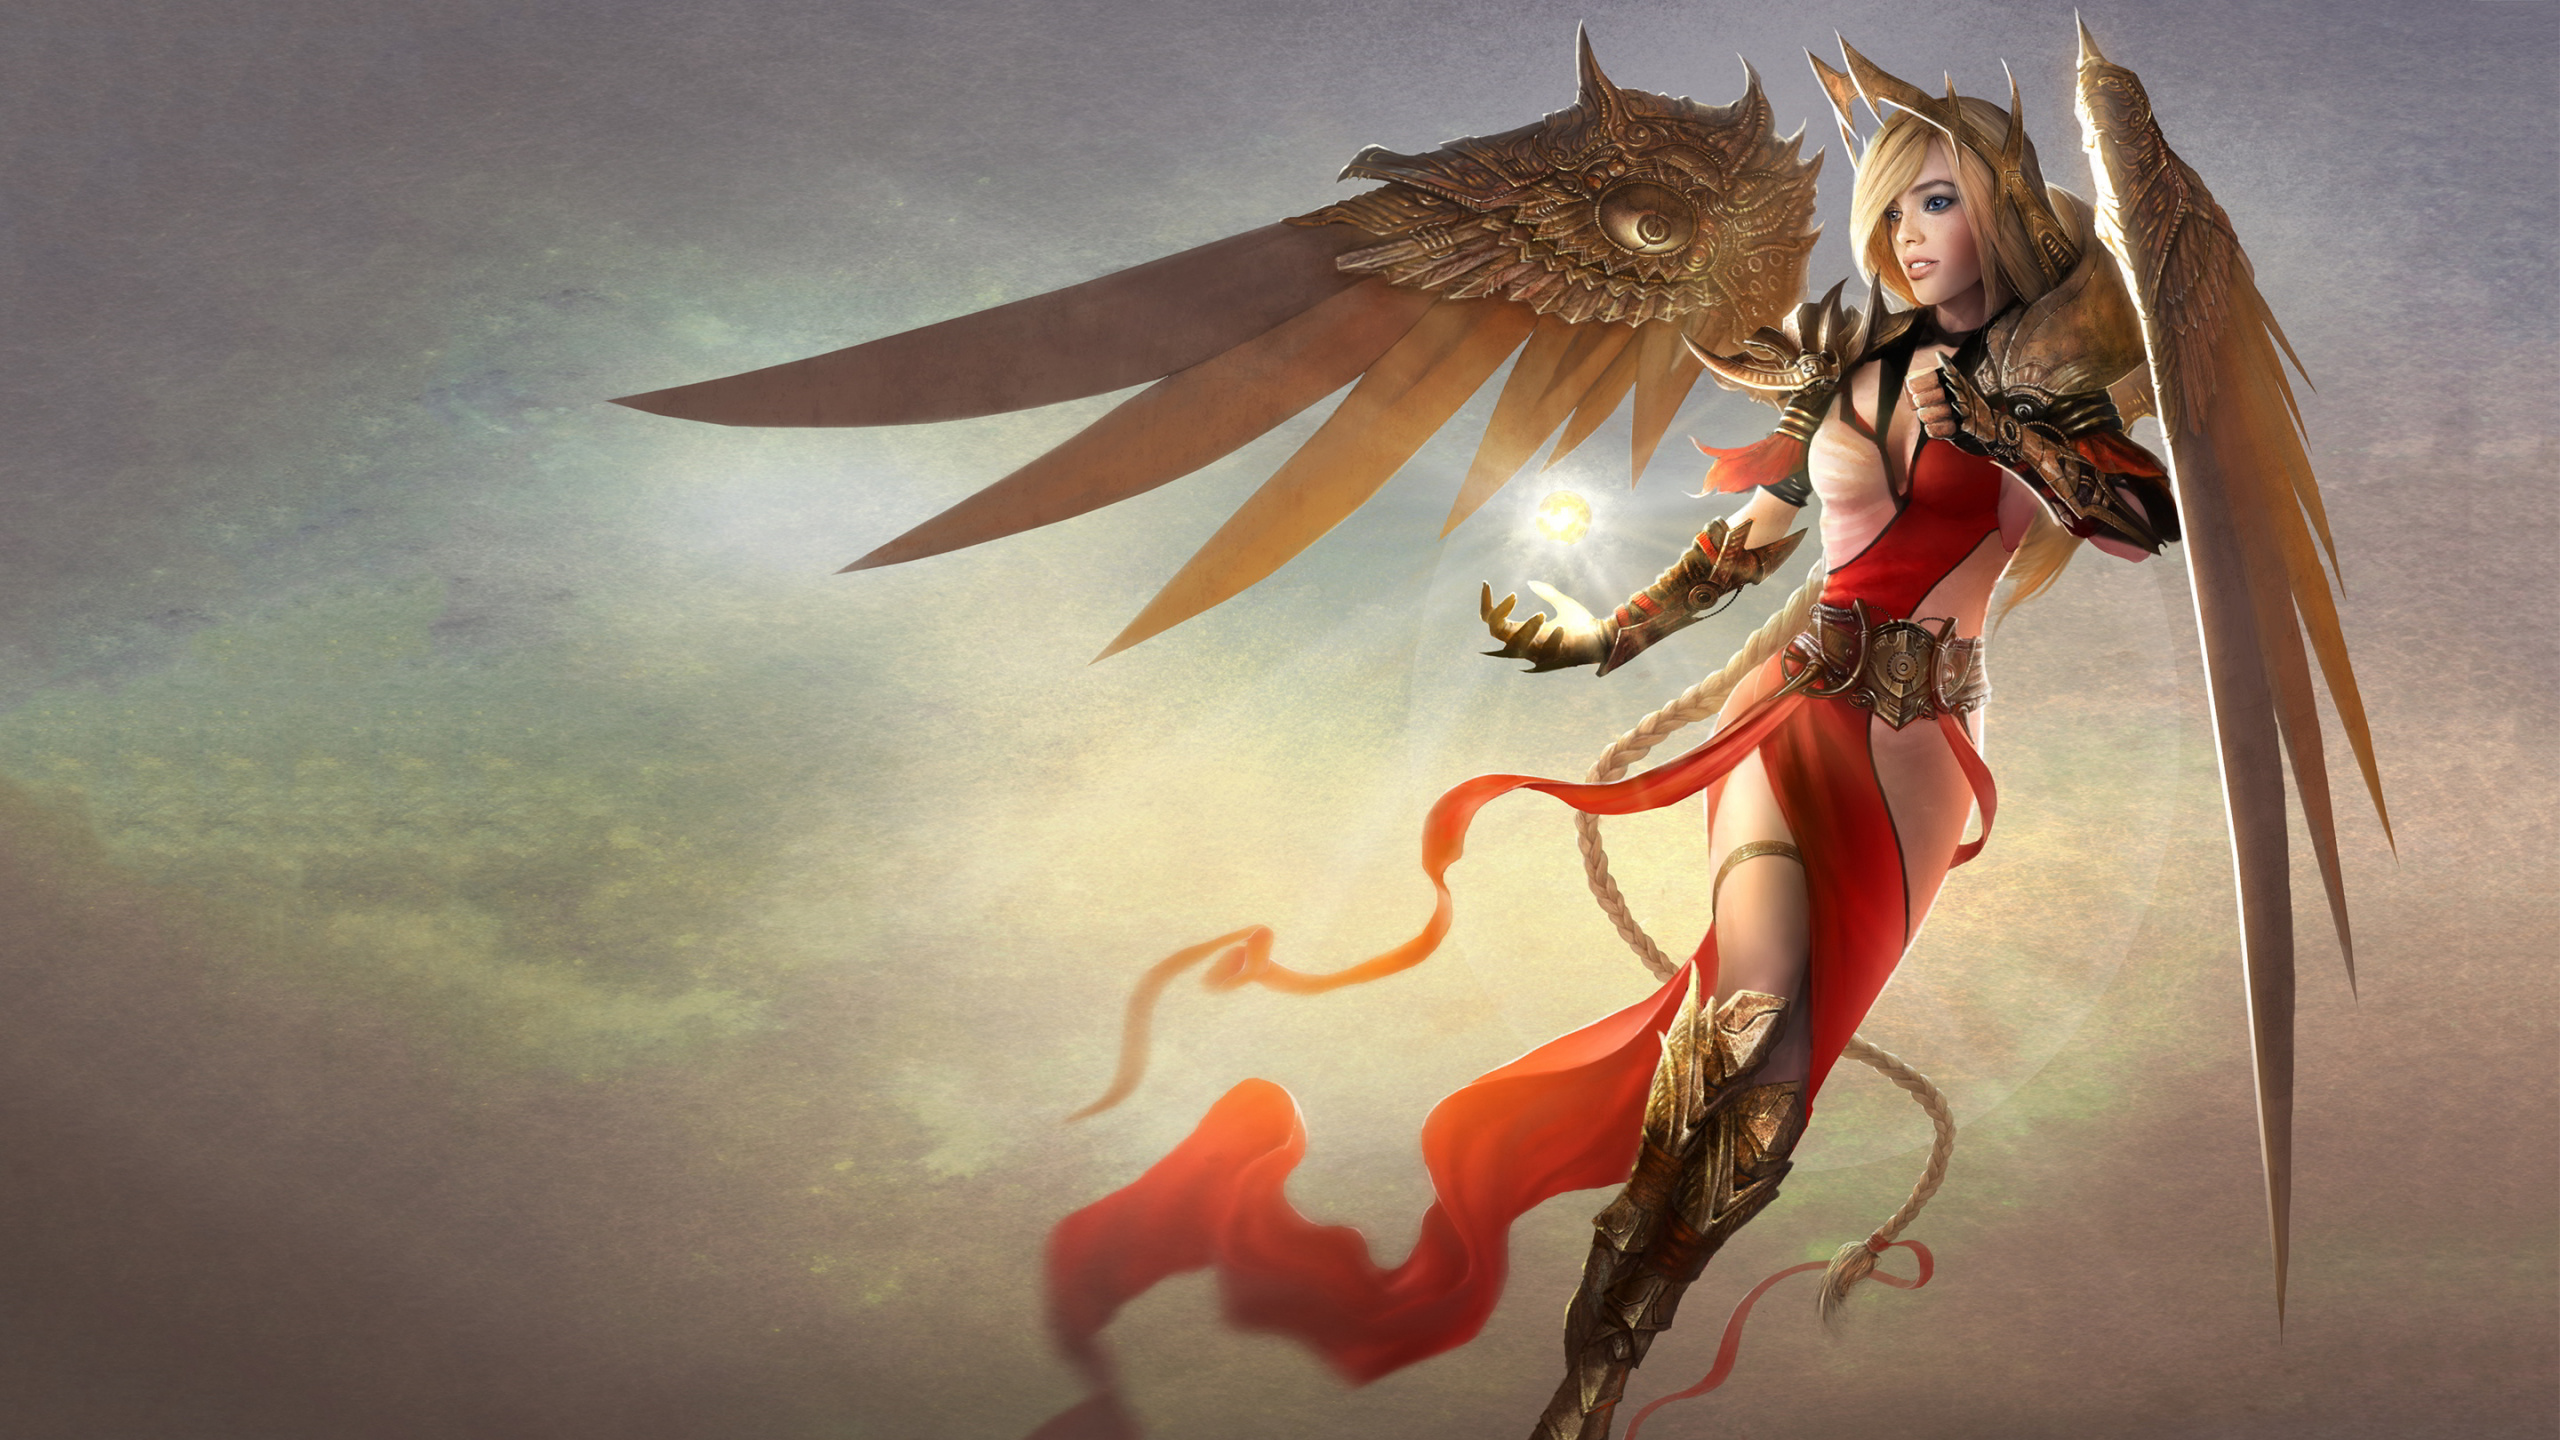 Woman in Red Dress Holding a Sword Illustration. Wallpaper in 2560x1440 Resolution